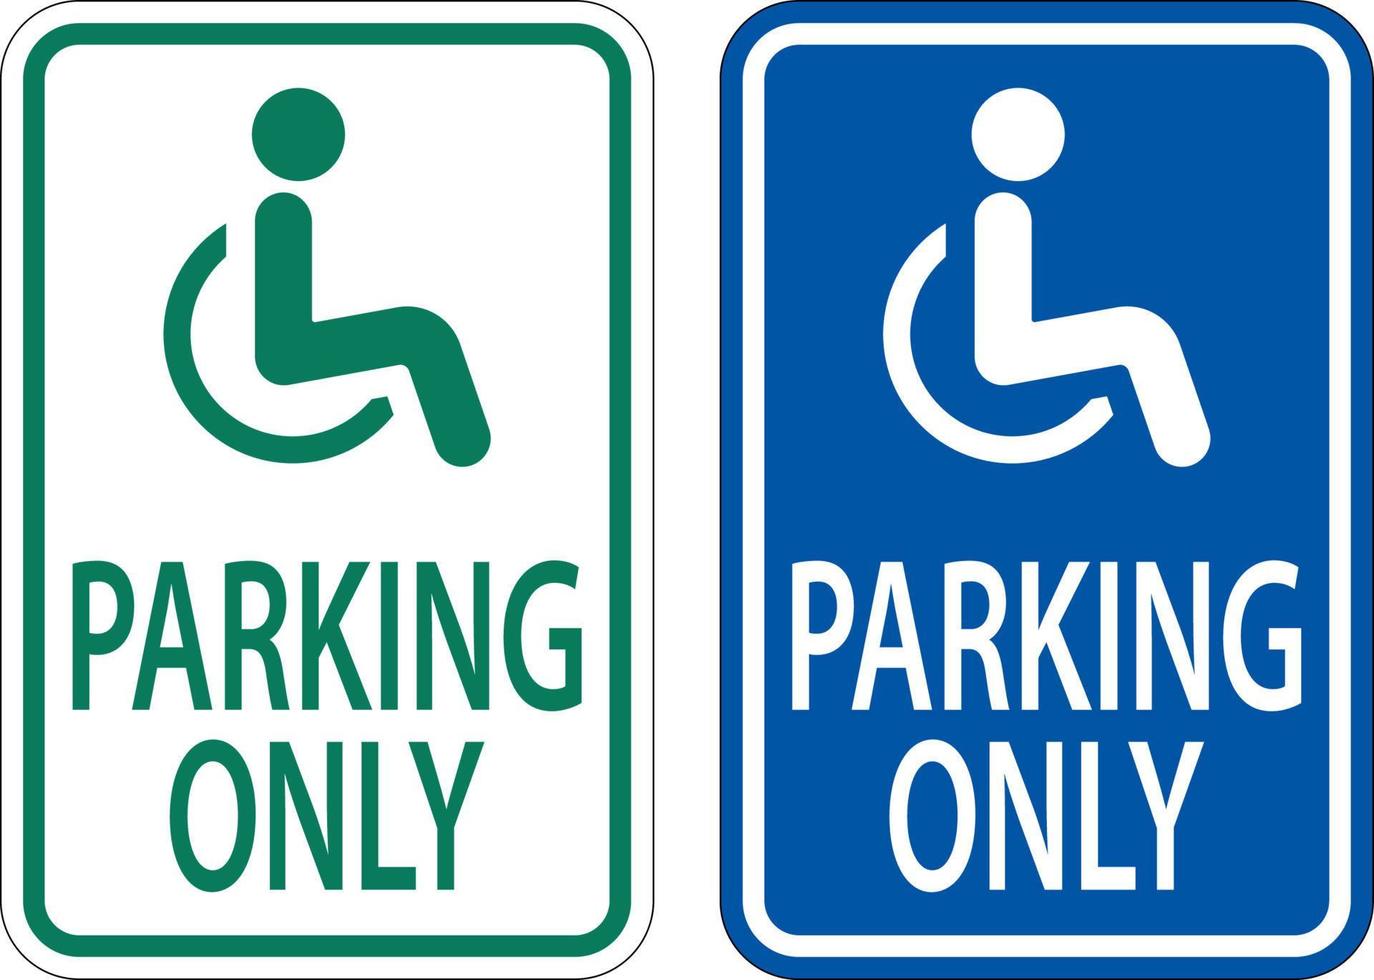 Accessible Parking Sign On White Background vector